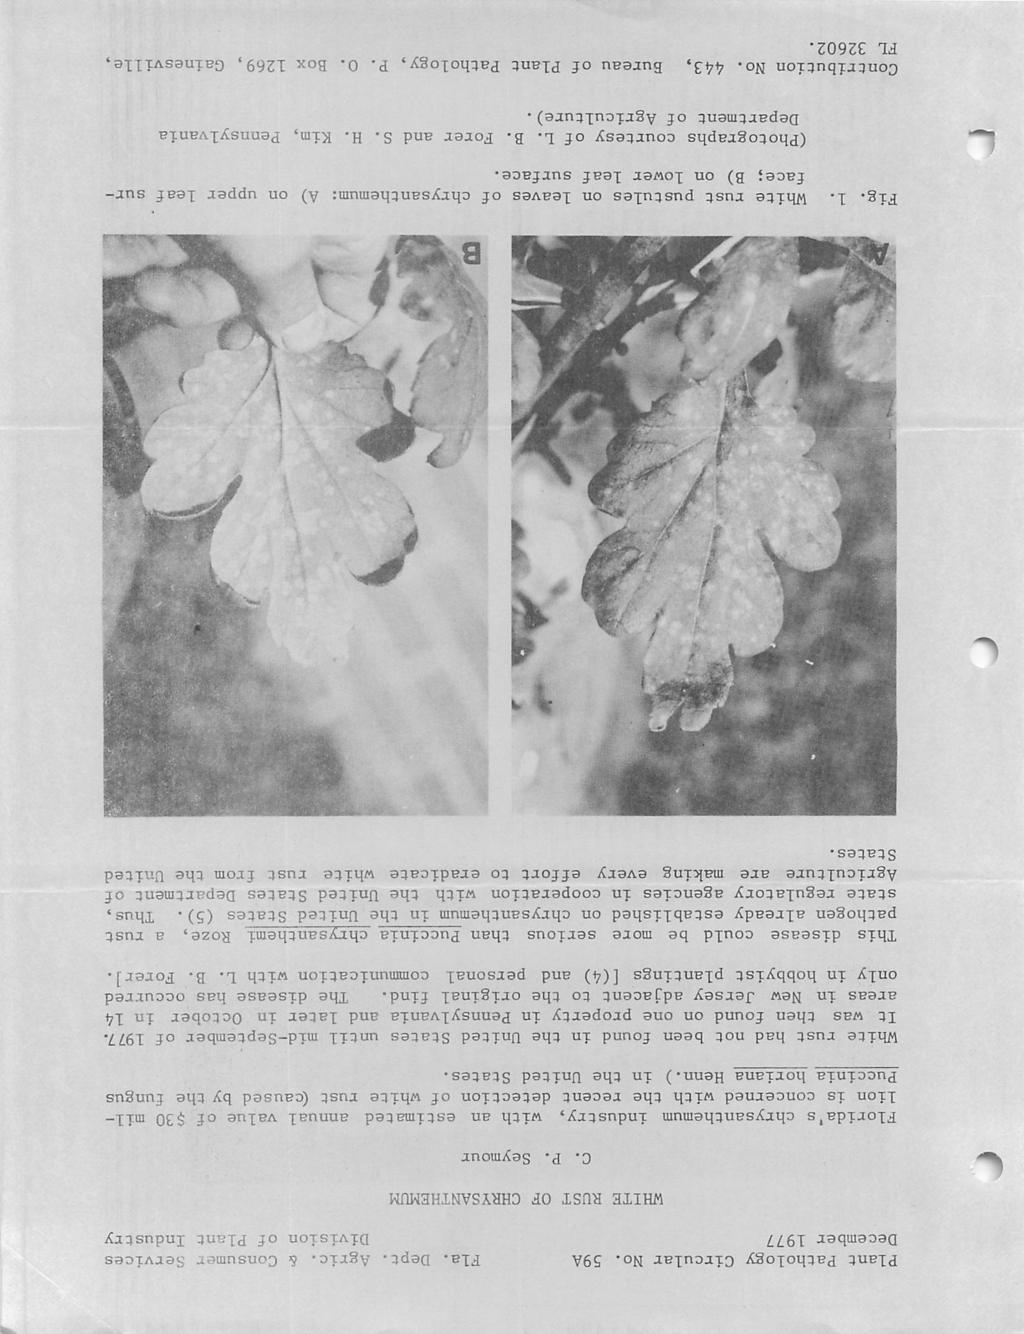 Plant Pathology Circular No. 59A December 1977 Fla. Dept. Agric. & Consumer Services Division of Plant Industry OF CHRYSANTHEMUM C. P. Seymour Florida's chrysanthemum industry, with an estimated annual value of $30 mil lion is concerned with the recent detection of white rust (caused by the fungus Puccinia horiana Henn.